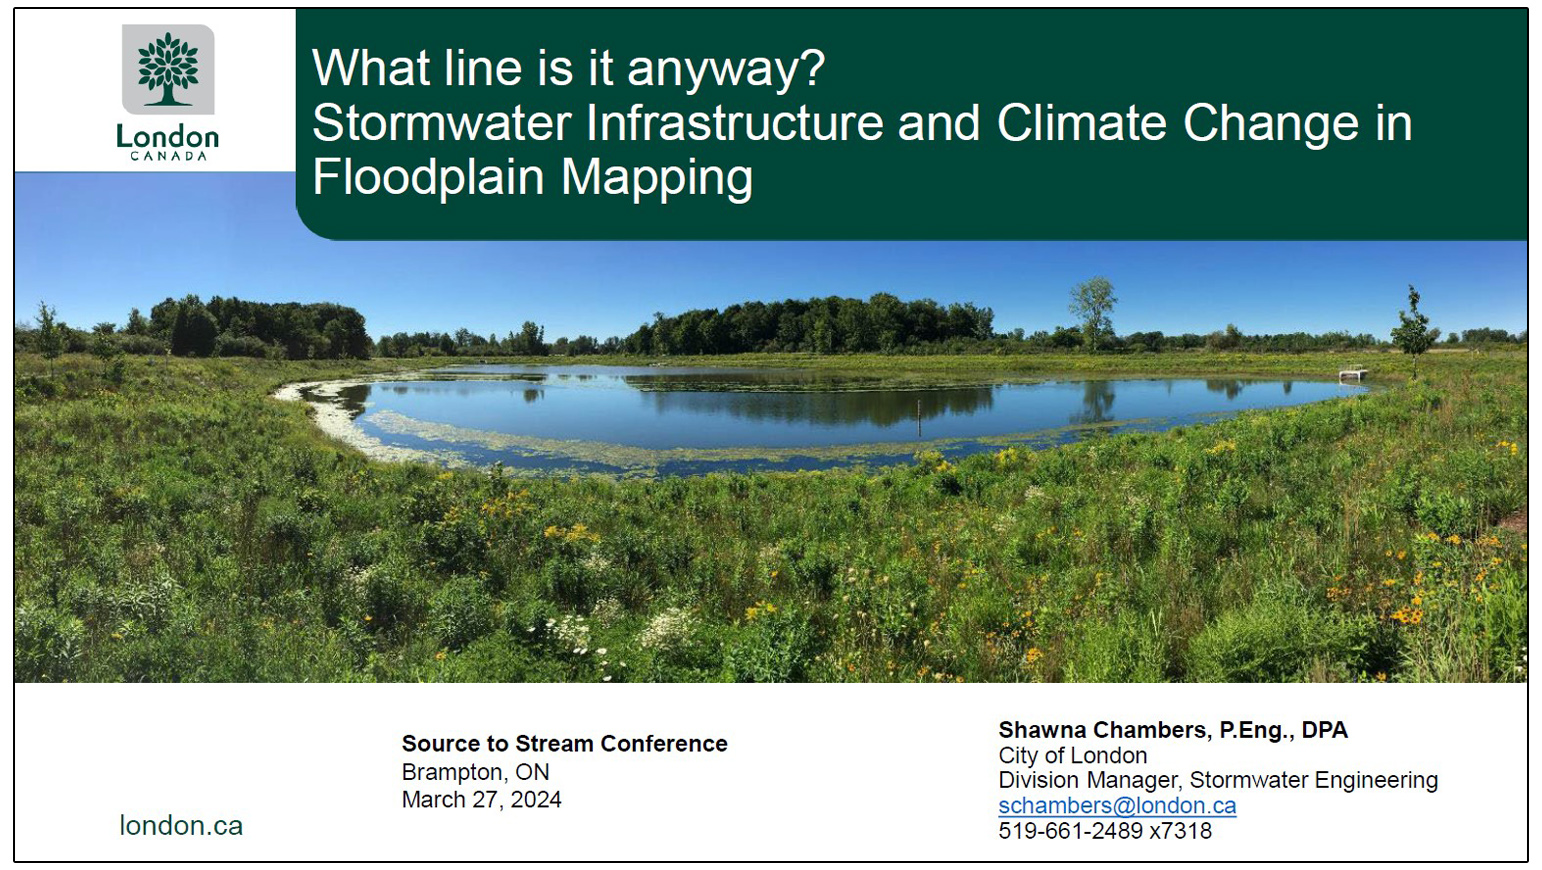 What Line is it Anyway - Considerations for Climate Change and Stormwater Infrastructure in Floodplain Mapping - Presented by Shawna Chambers -City of London​